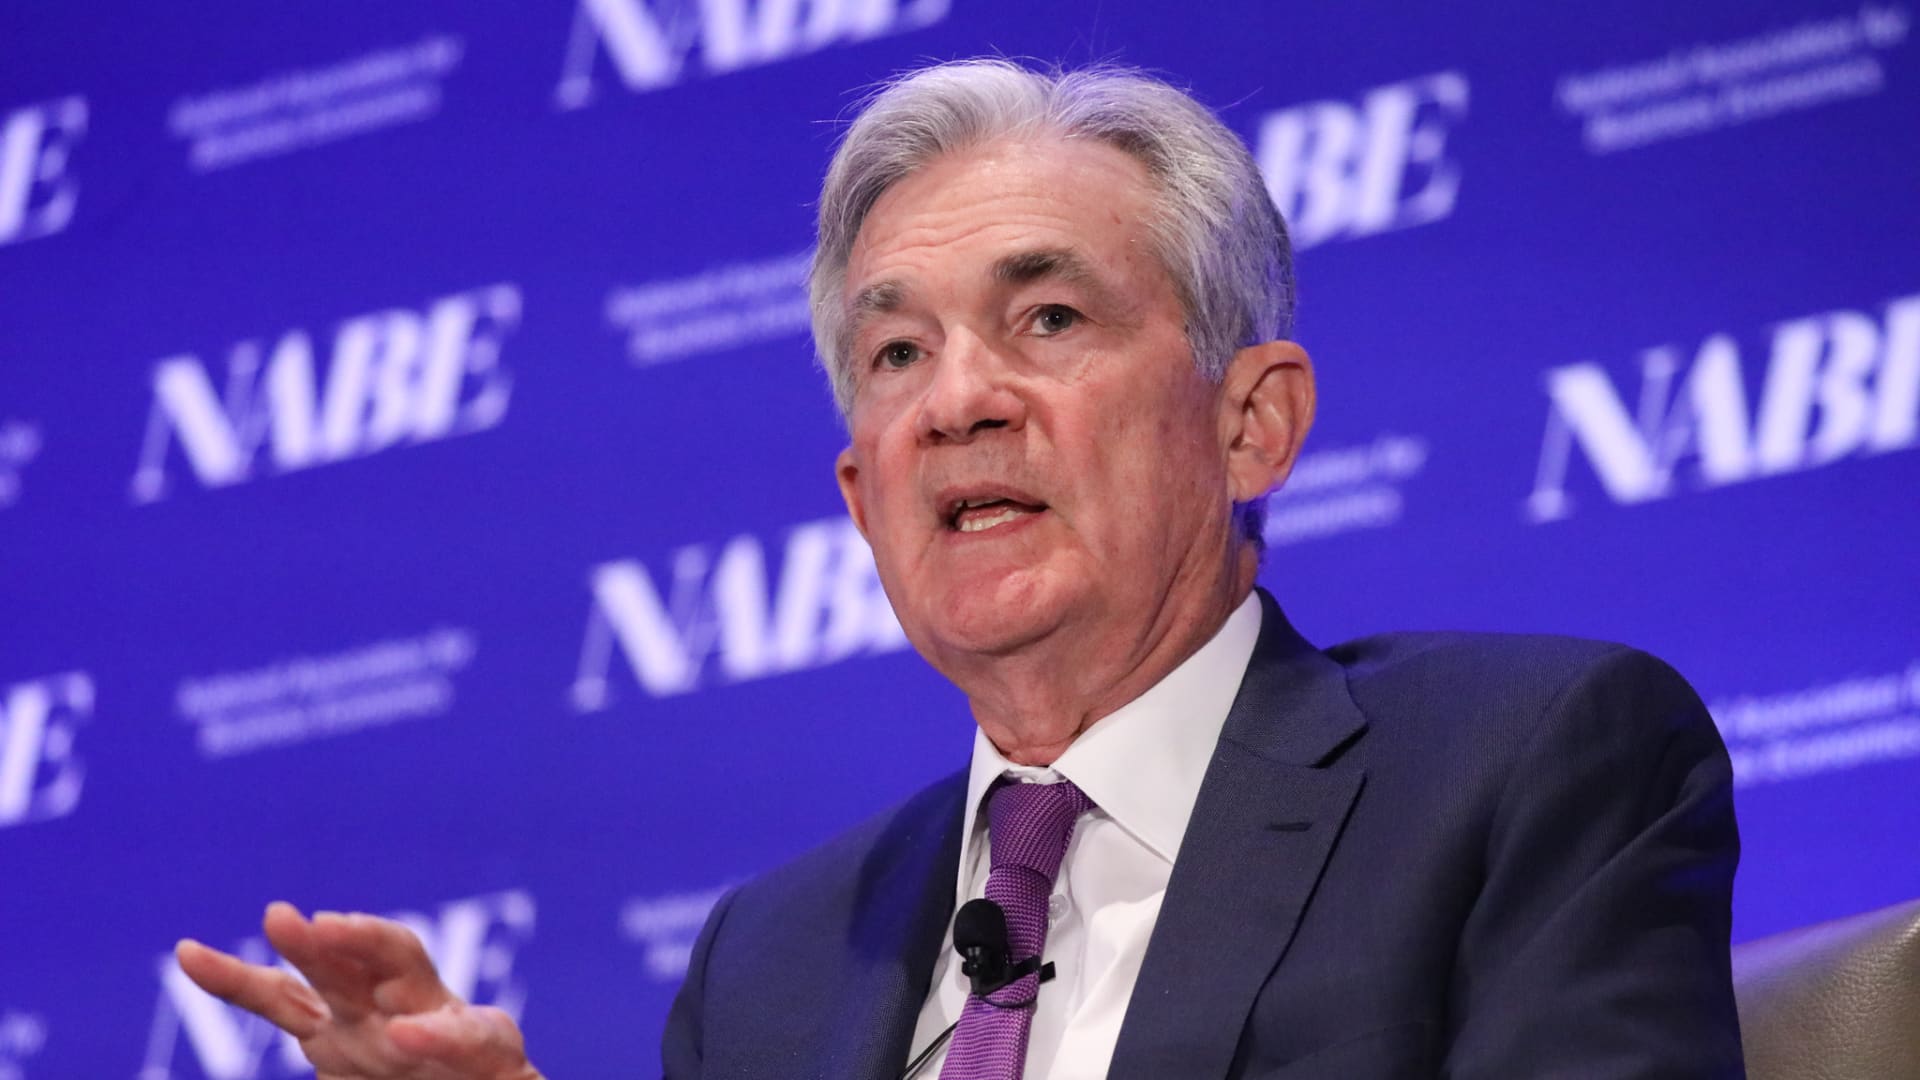 Jerome Powell, Chairman of the U.S. Federal Reserve, speaks during the National Association of Business Economicseconomic policy conference in Washington, D.C, United States on March 21, 2022.